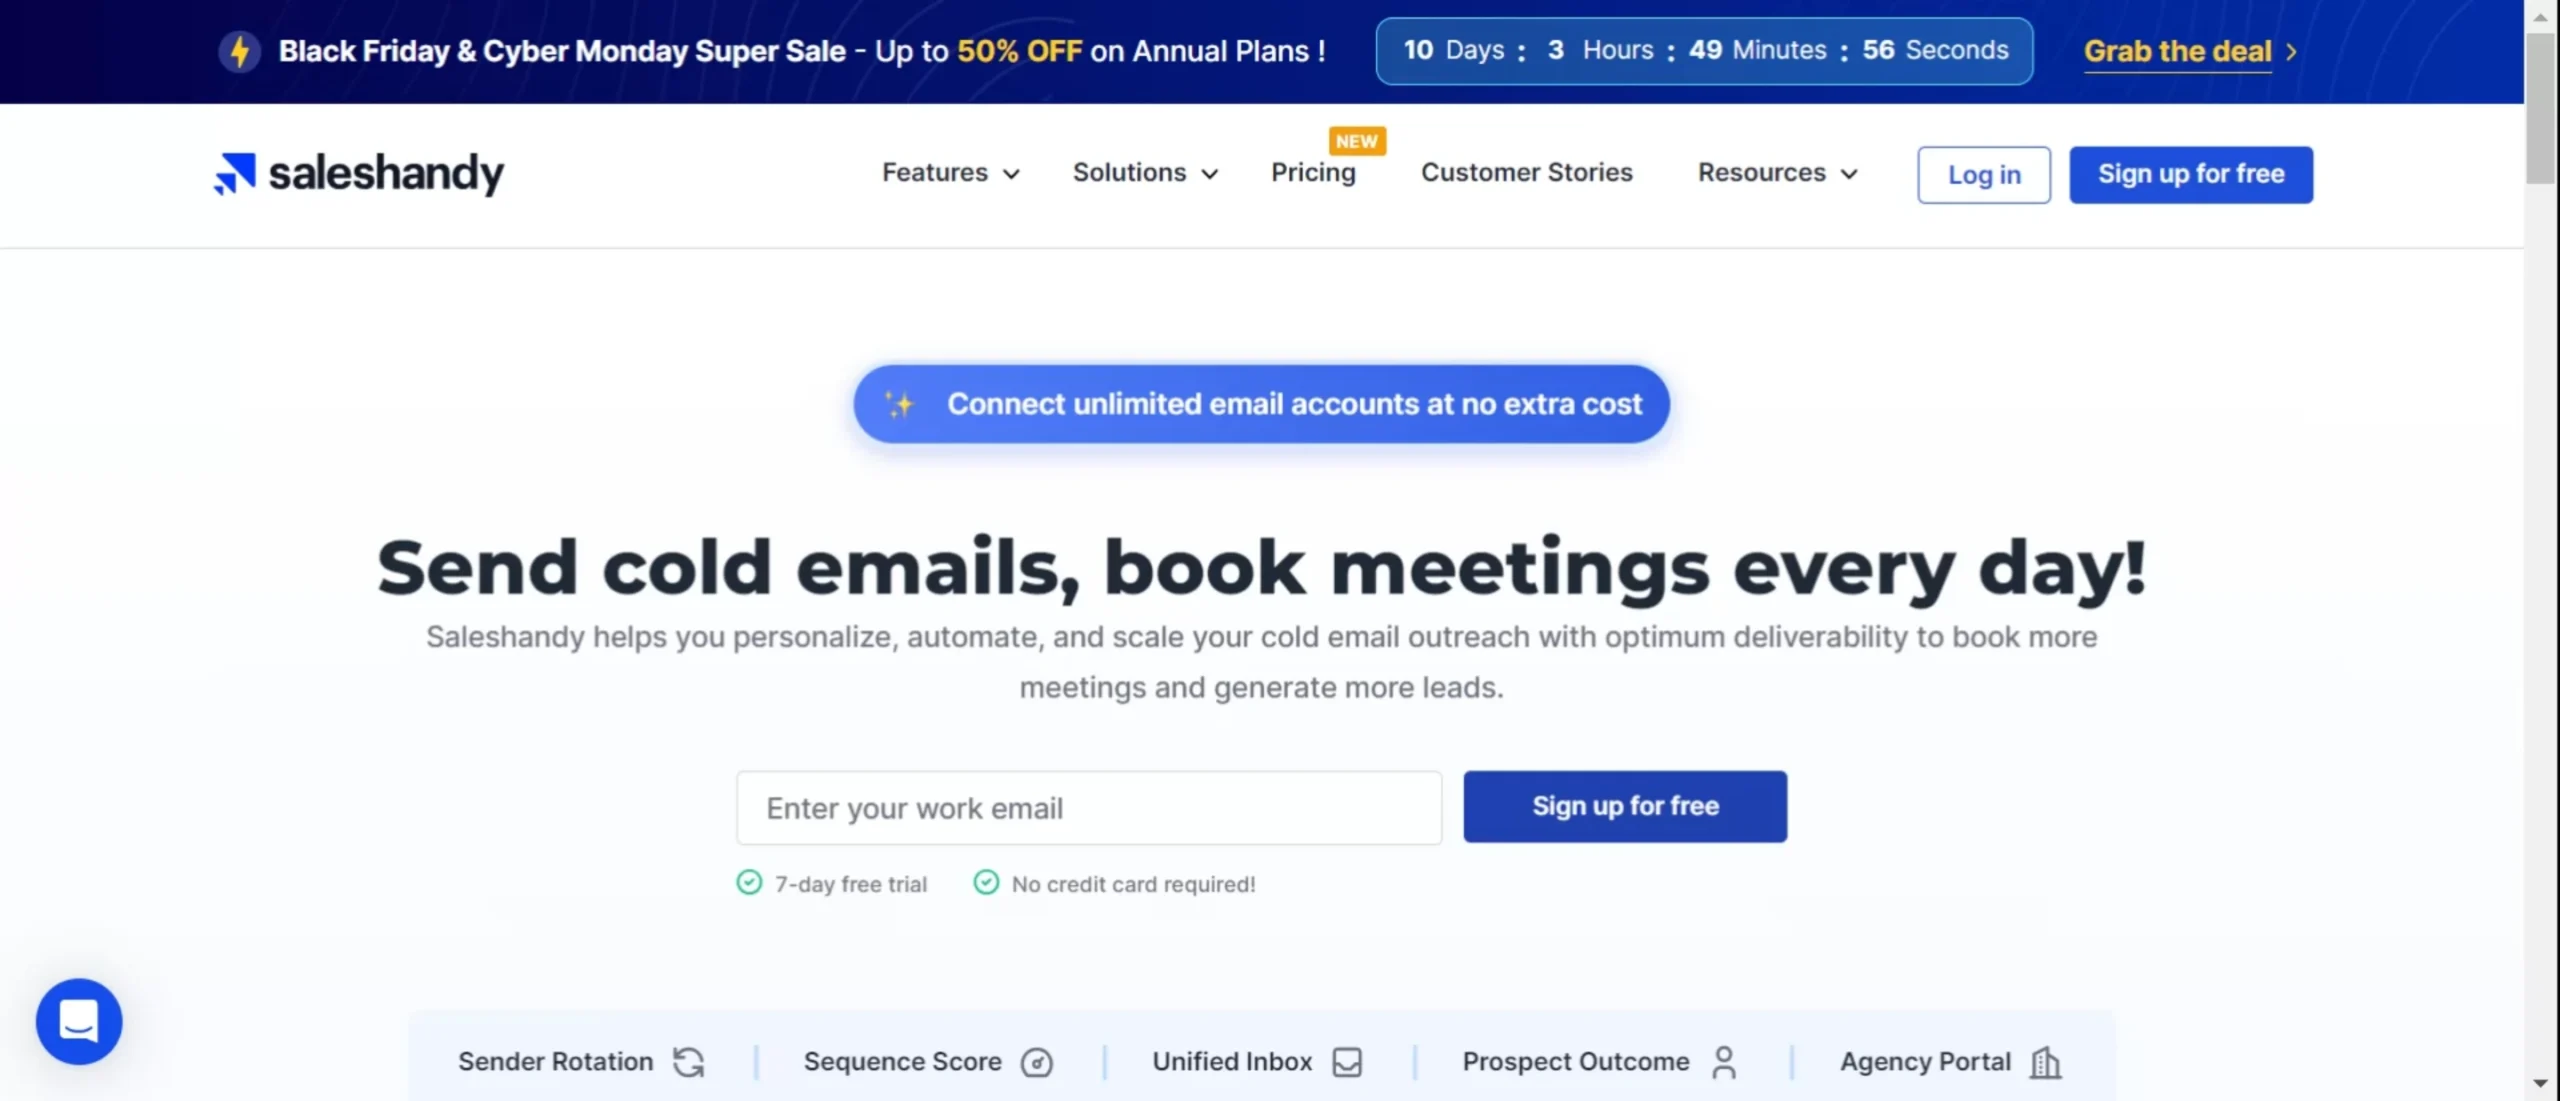 Top 15 Black Friday SaaS Deals for 2023